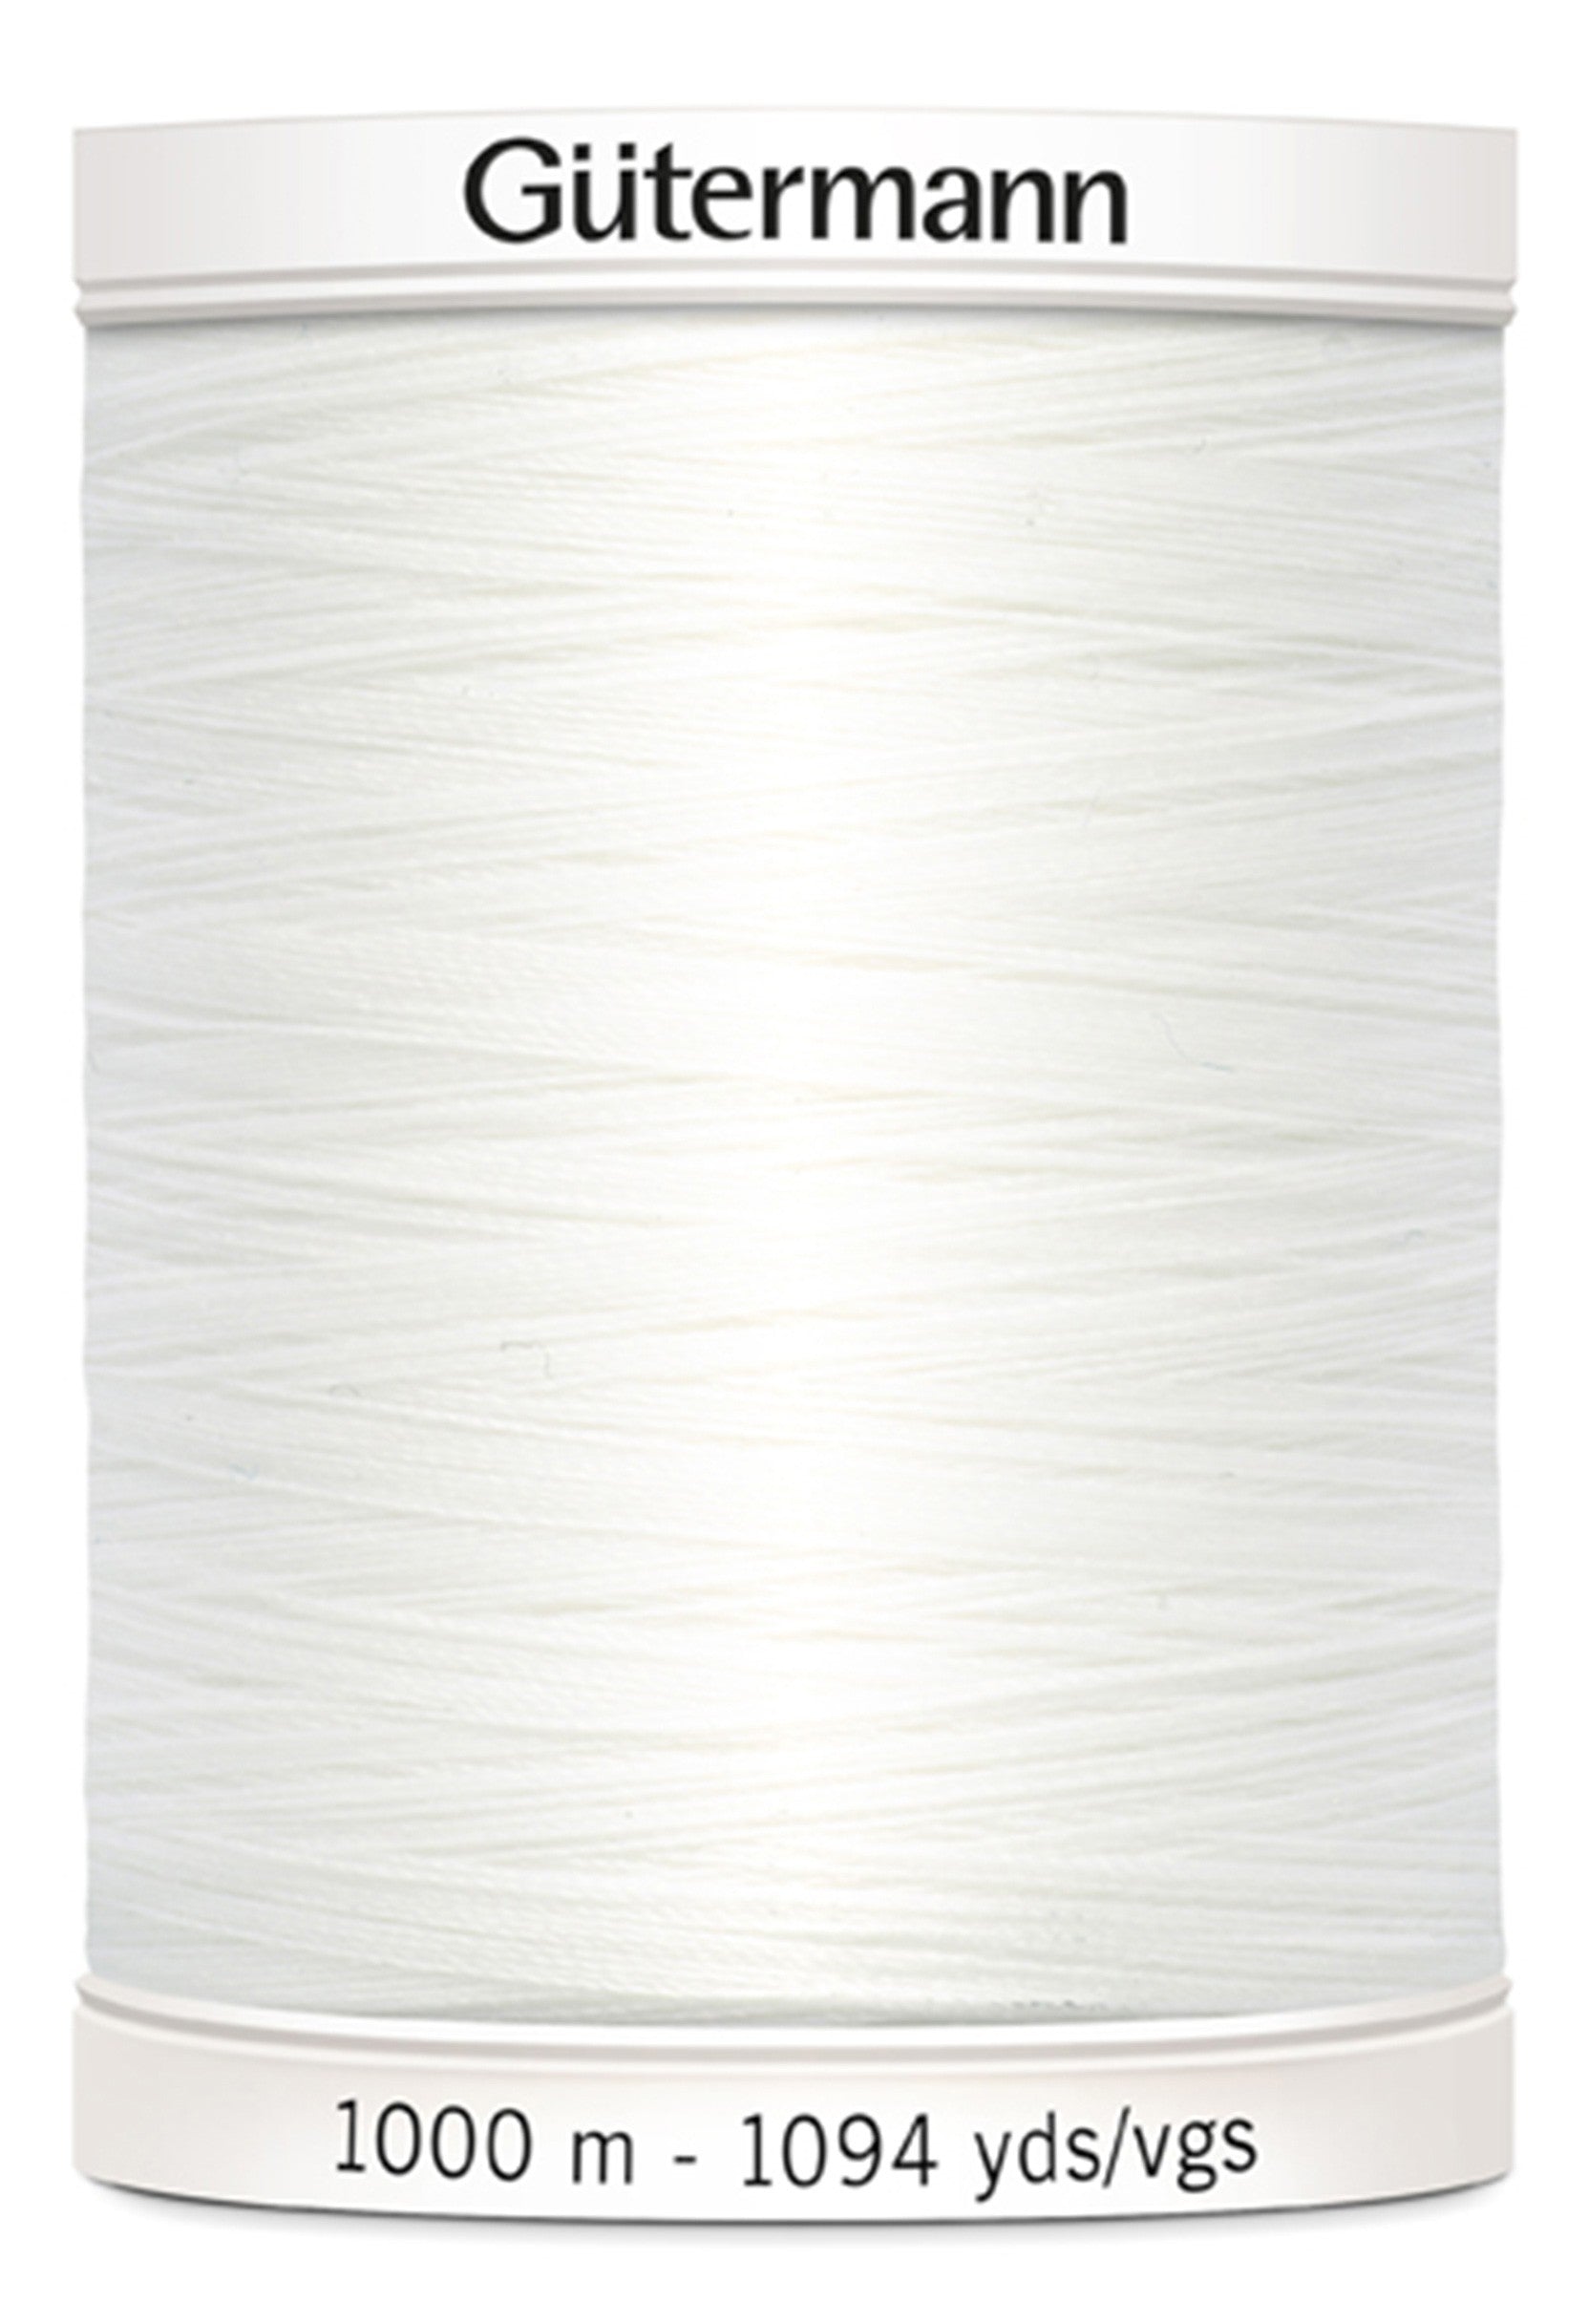 Gutermann Sew-All Polyester 020 Nu White  1000m/1094yd